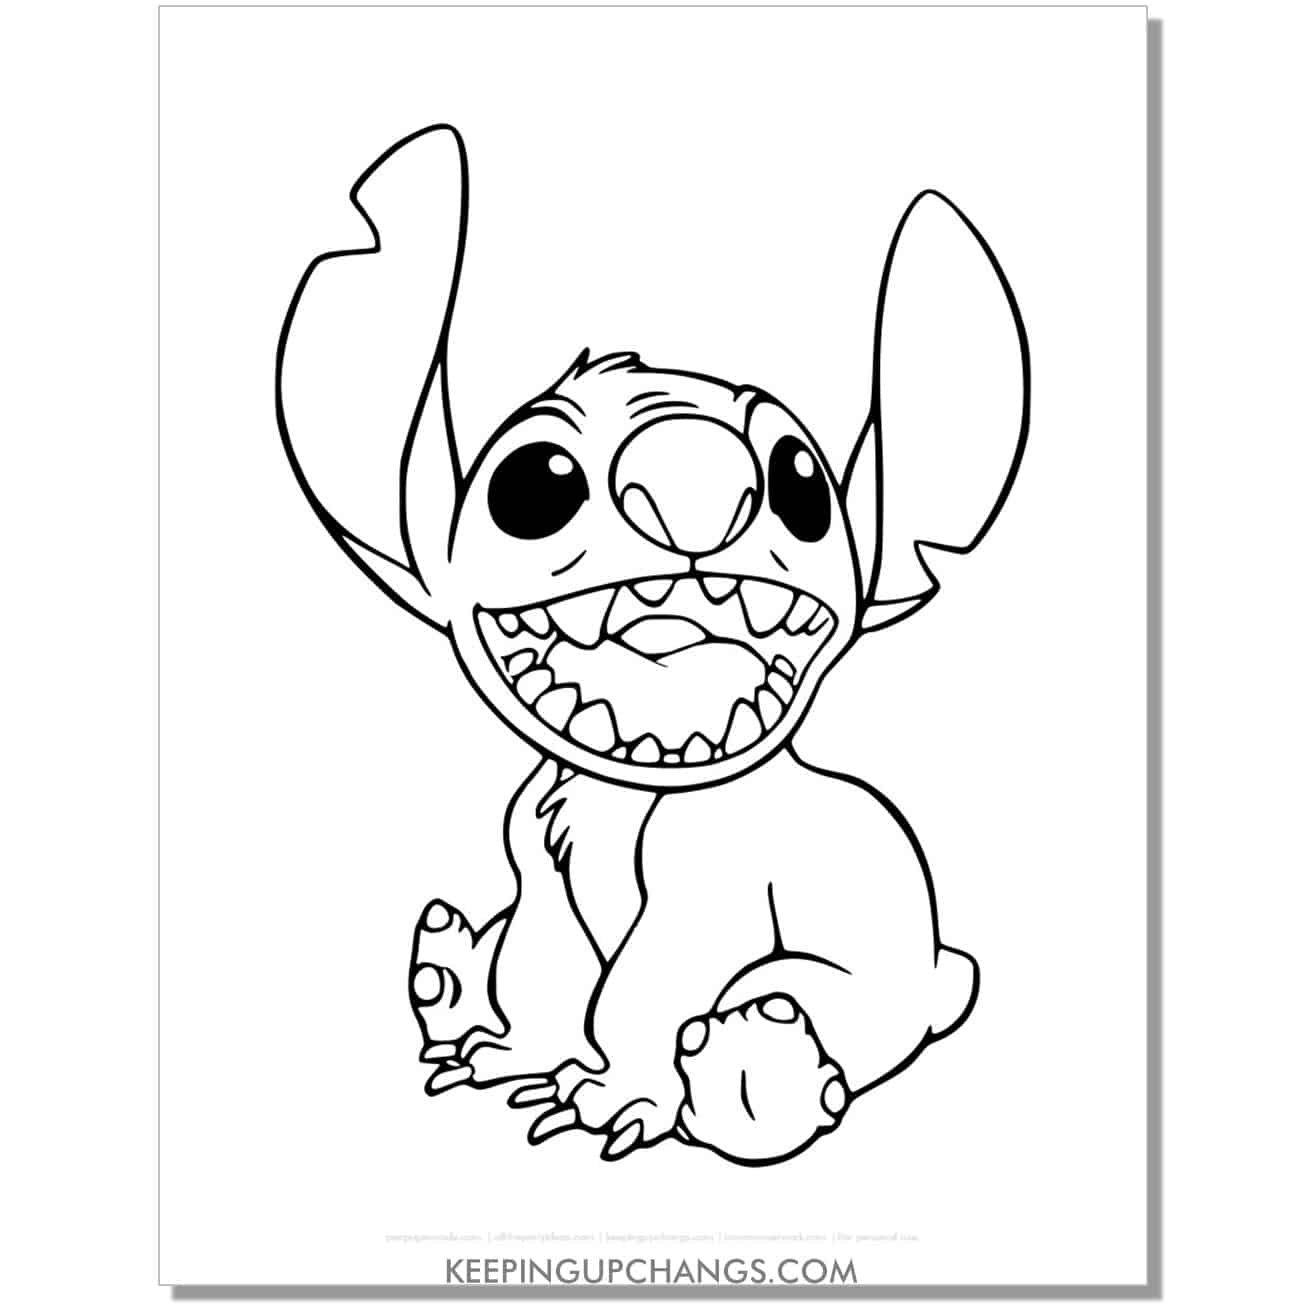 free baby stitch sitting coloring page.